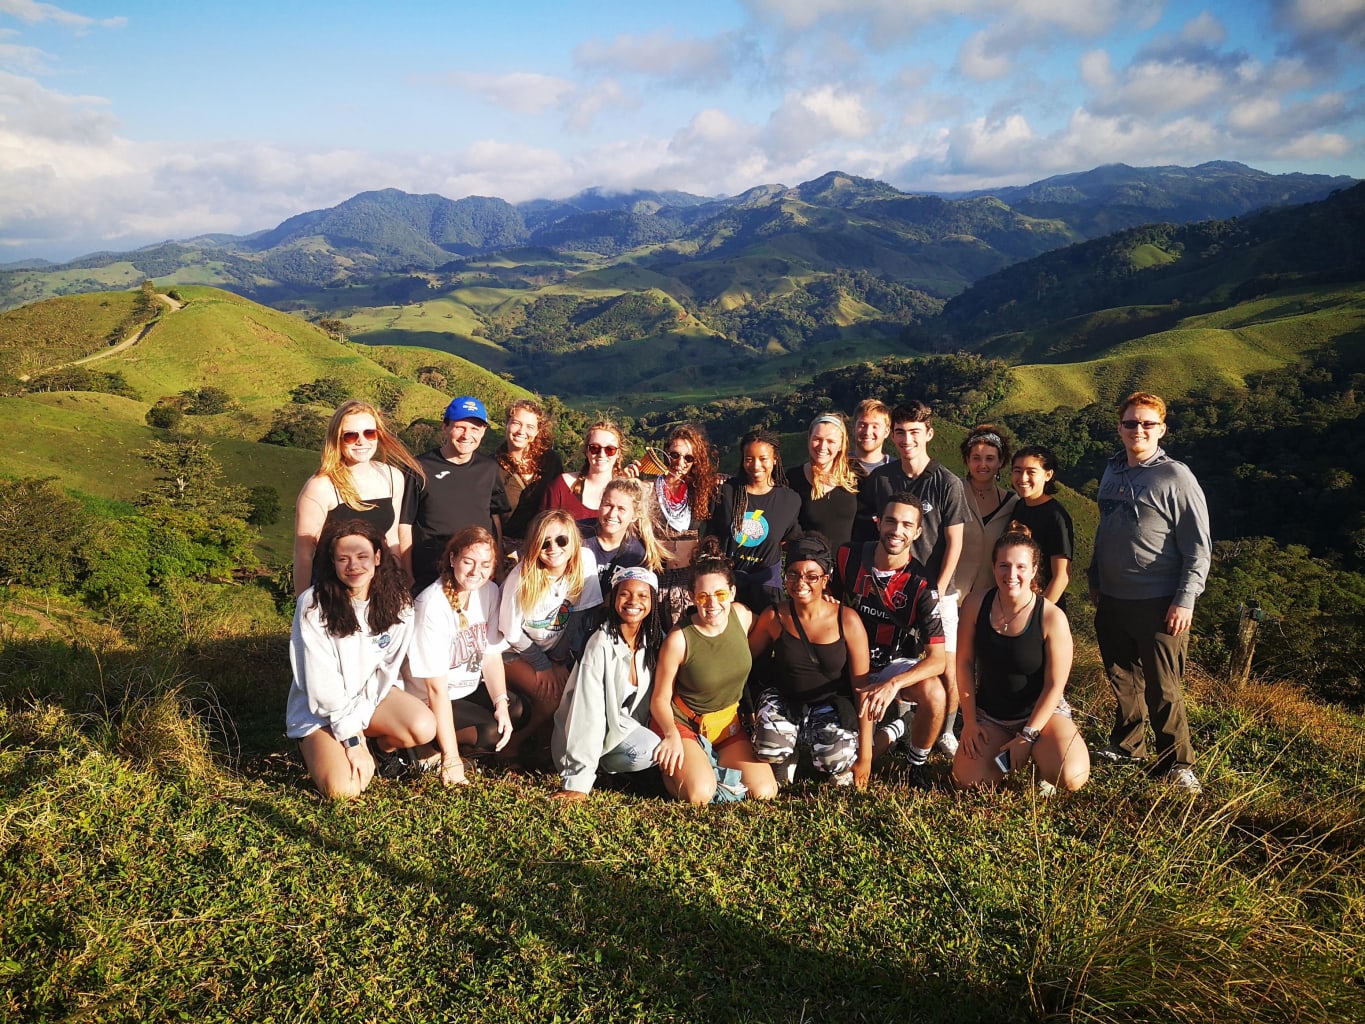 Group photo in the mountains of San Jose, Costa Rica.